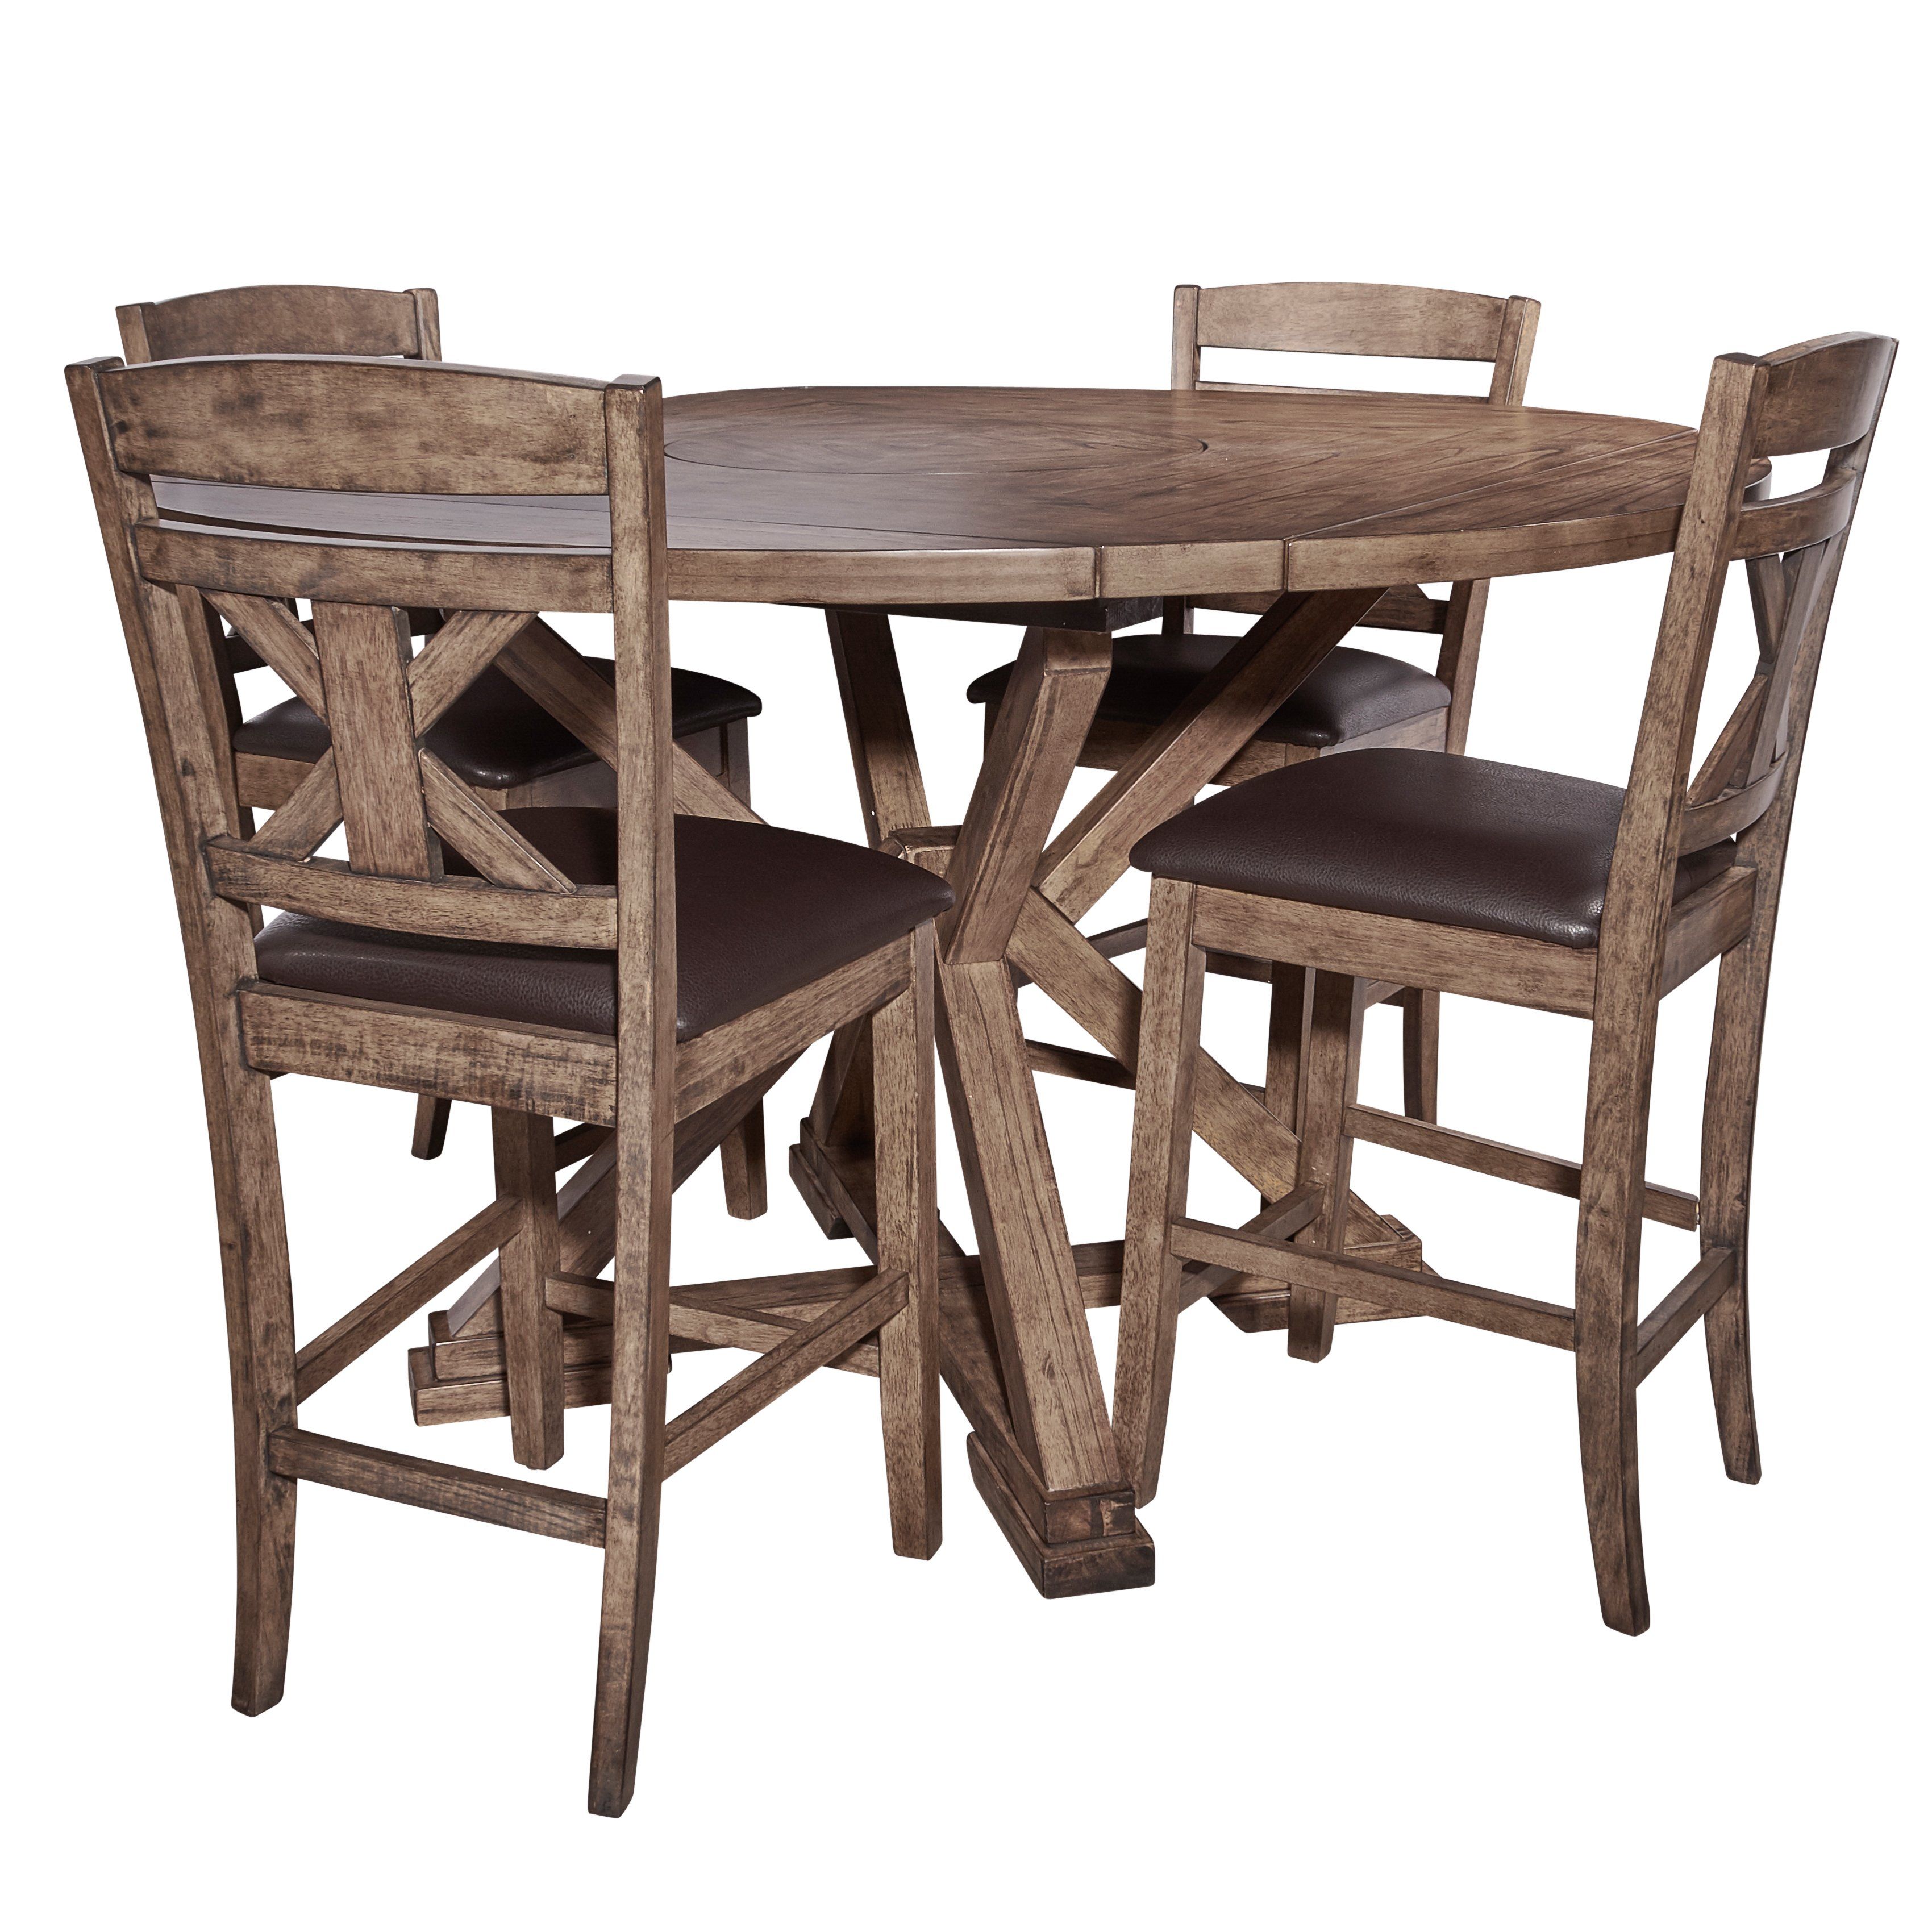 Shop Cohen Weathered Oak 5 Piece Counter Height Dining Set – Free Intended For Cohen Foam Oversized Sofa Chairs (View 13 of 20)